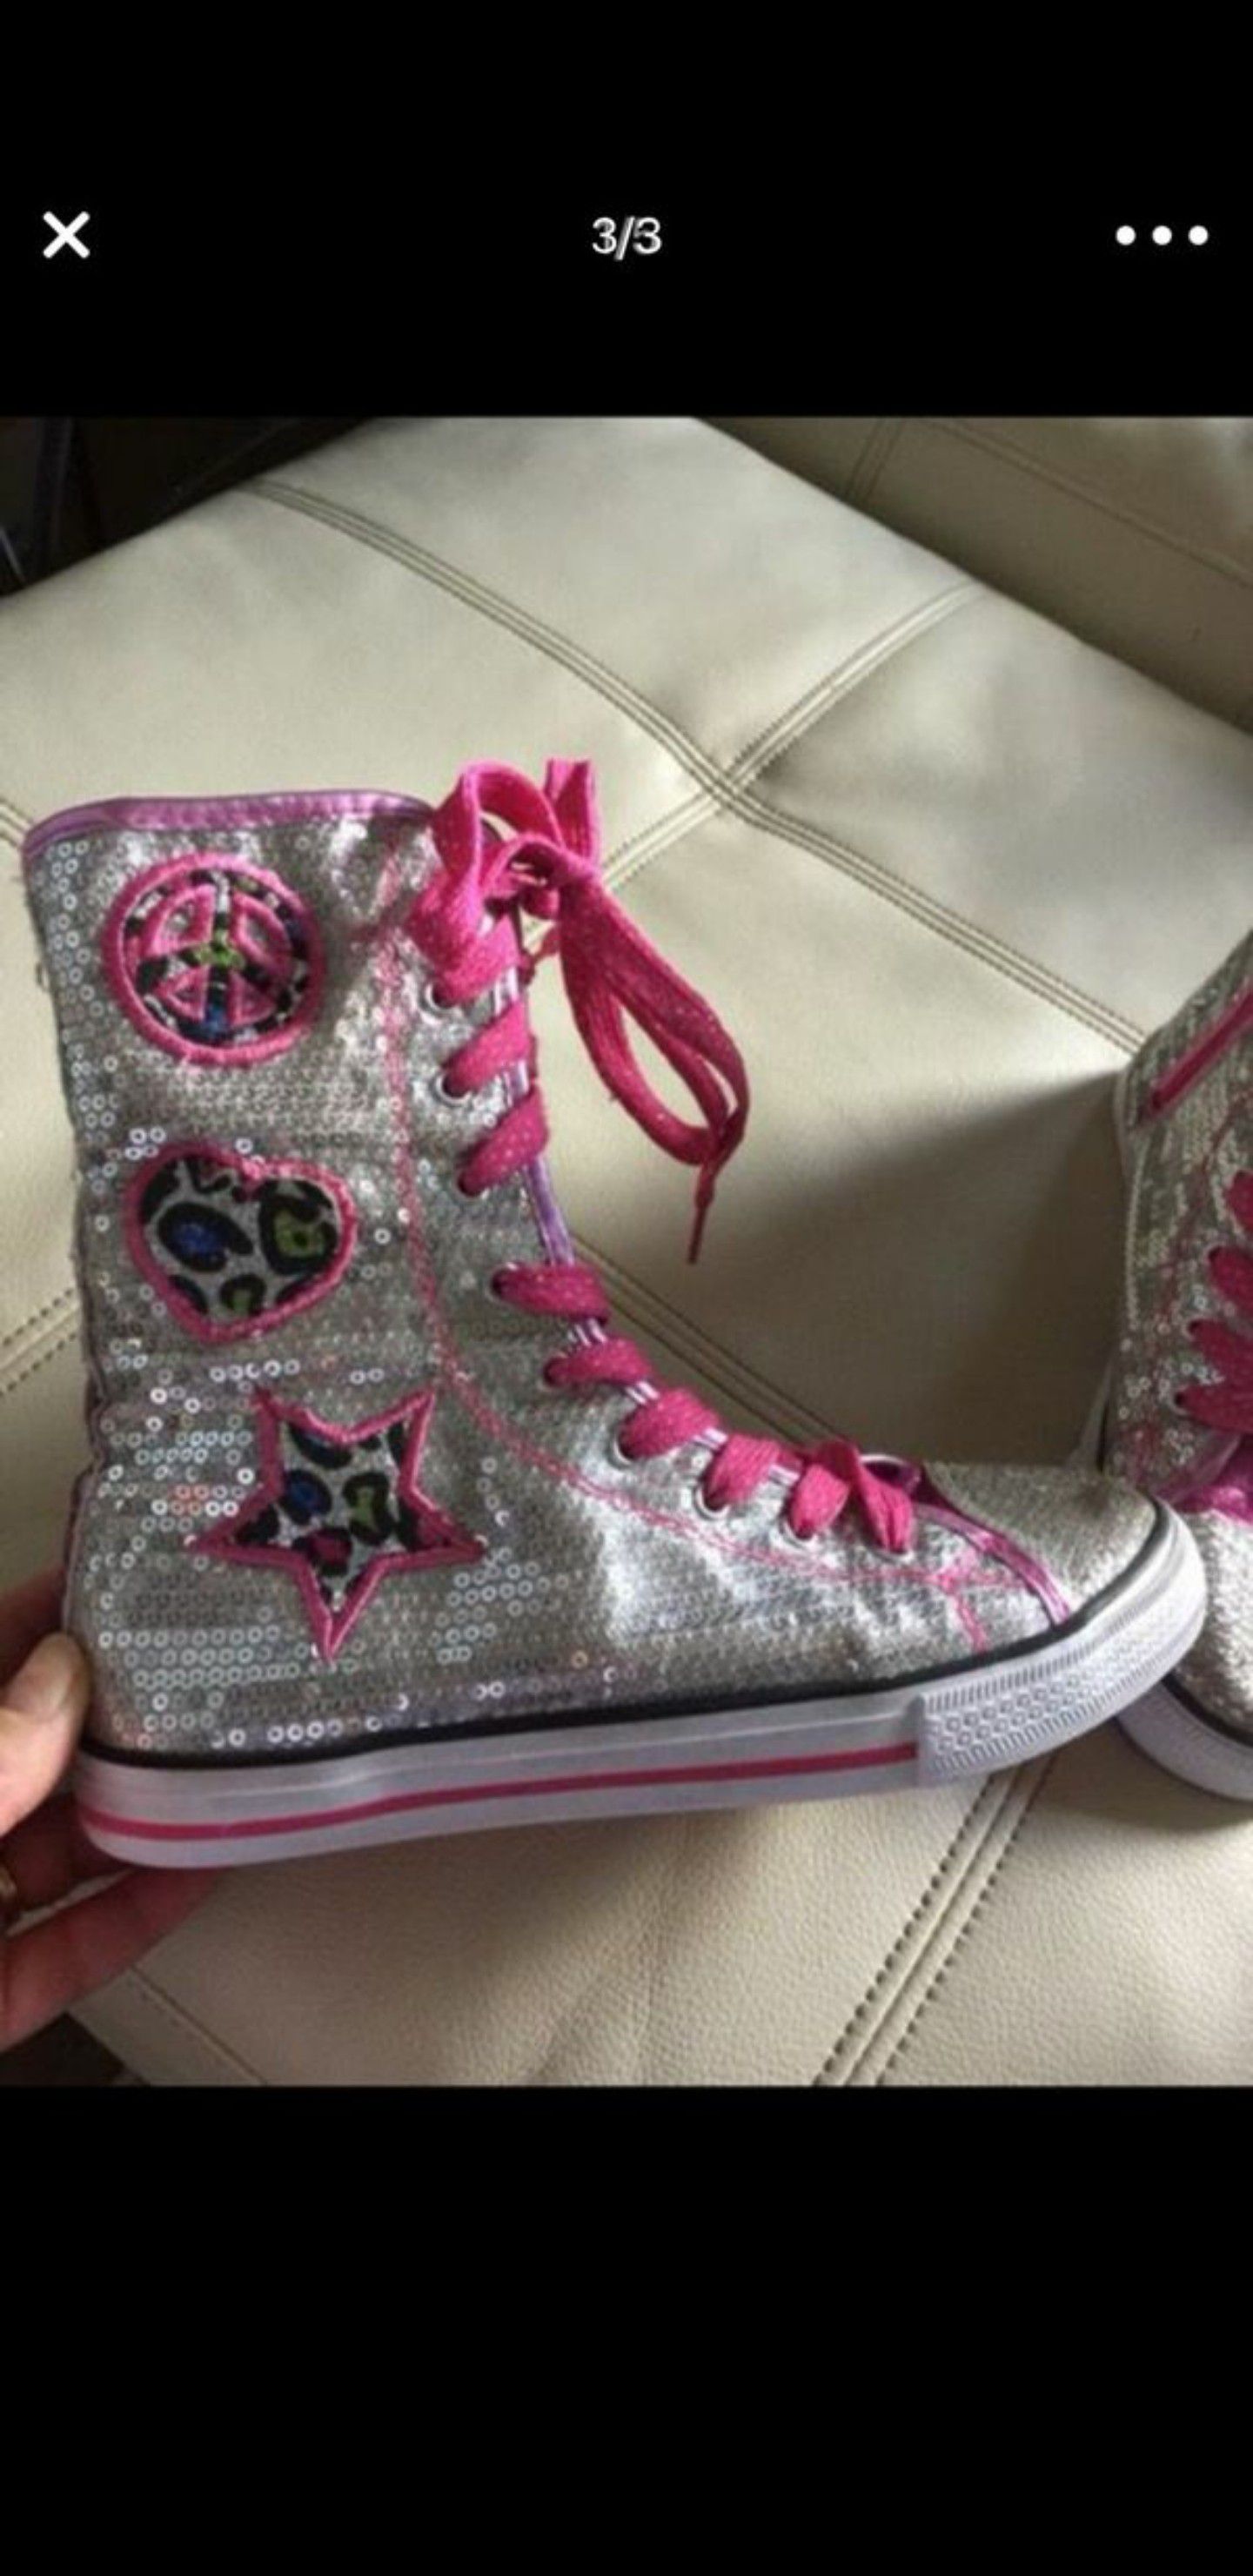 Size 4 girls shoes, high tops, fashionista, pink, leopard, sparkles...